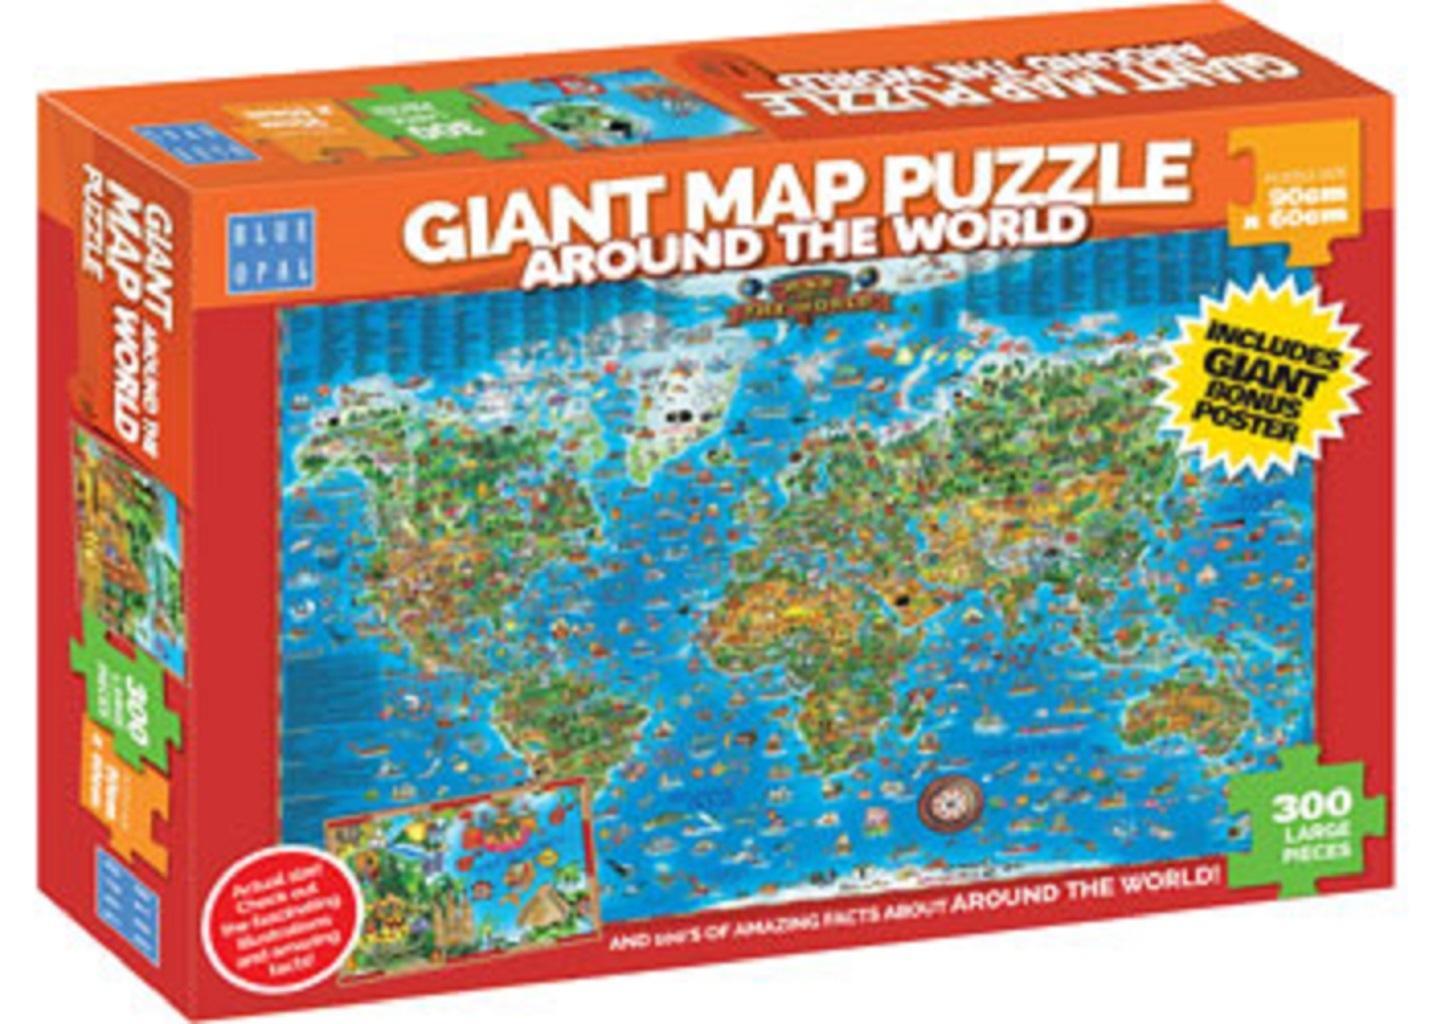 Blue Opal Jigsaw Puzzle Around the World 300 pieces